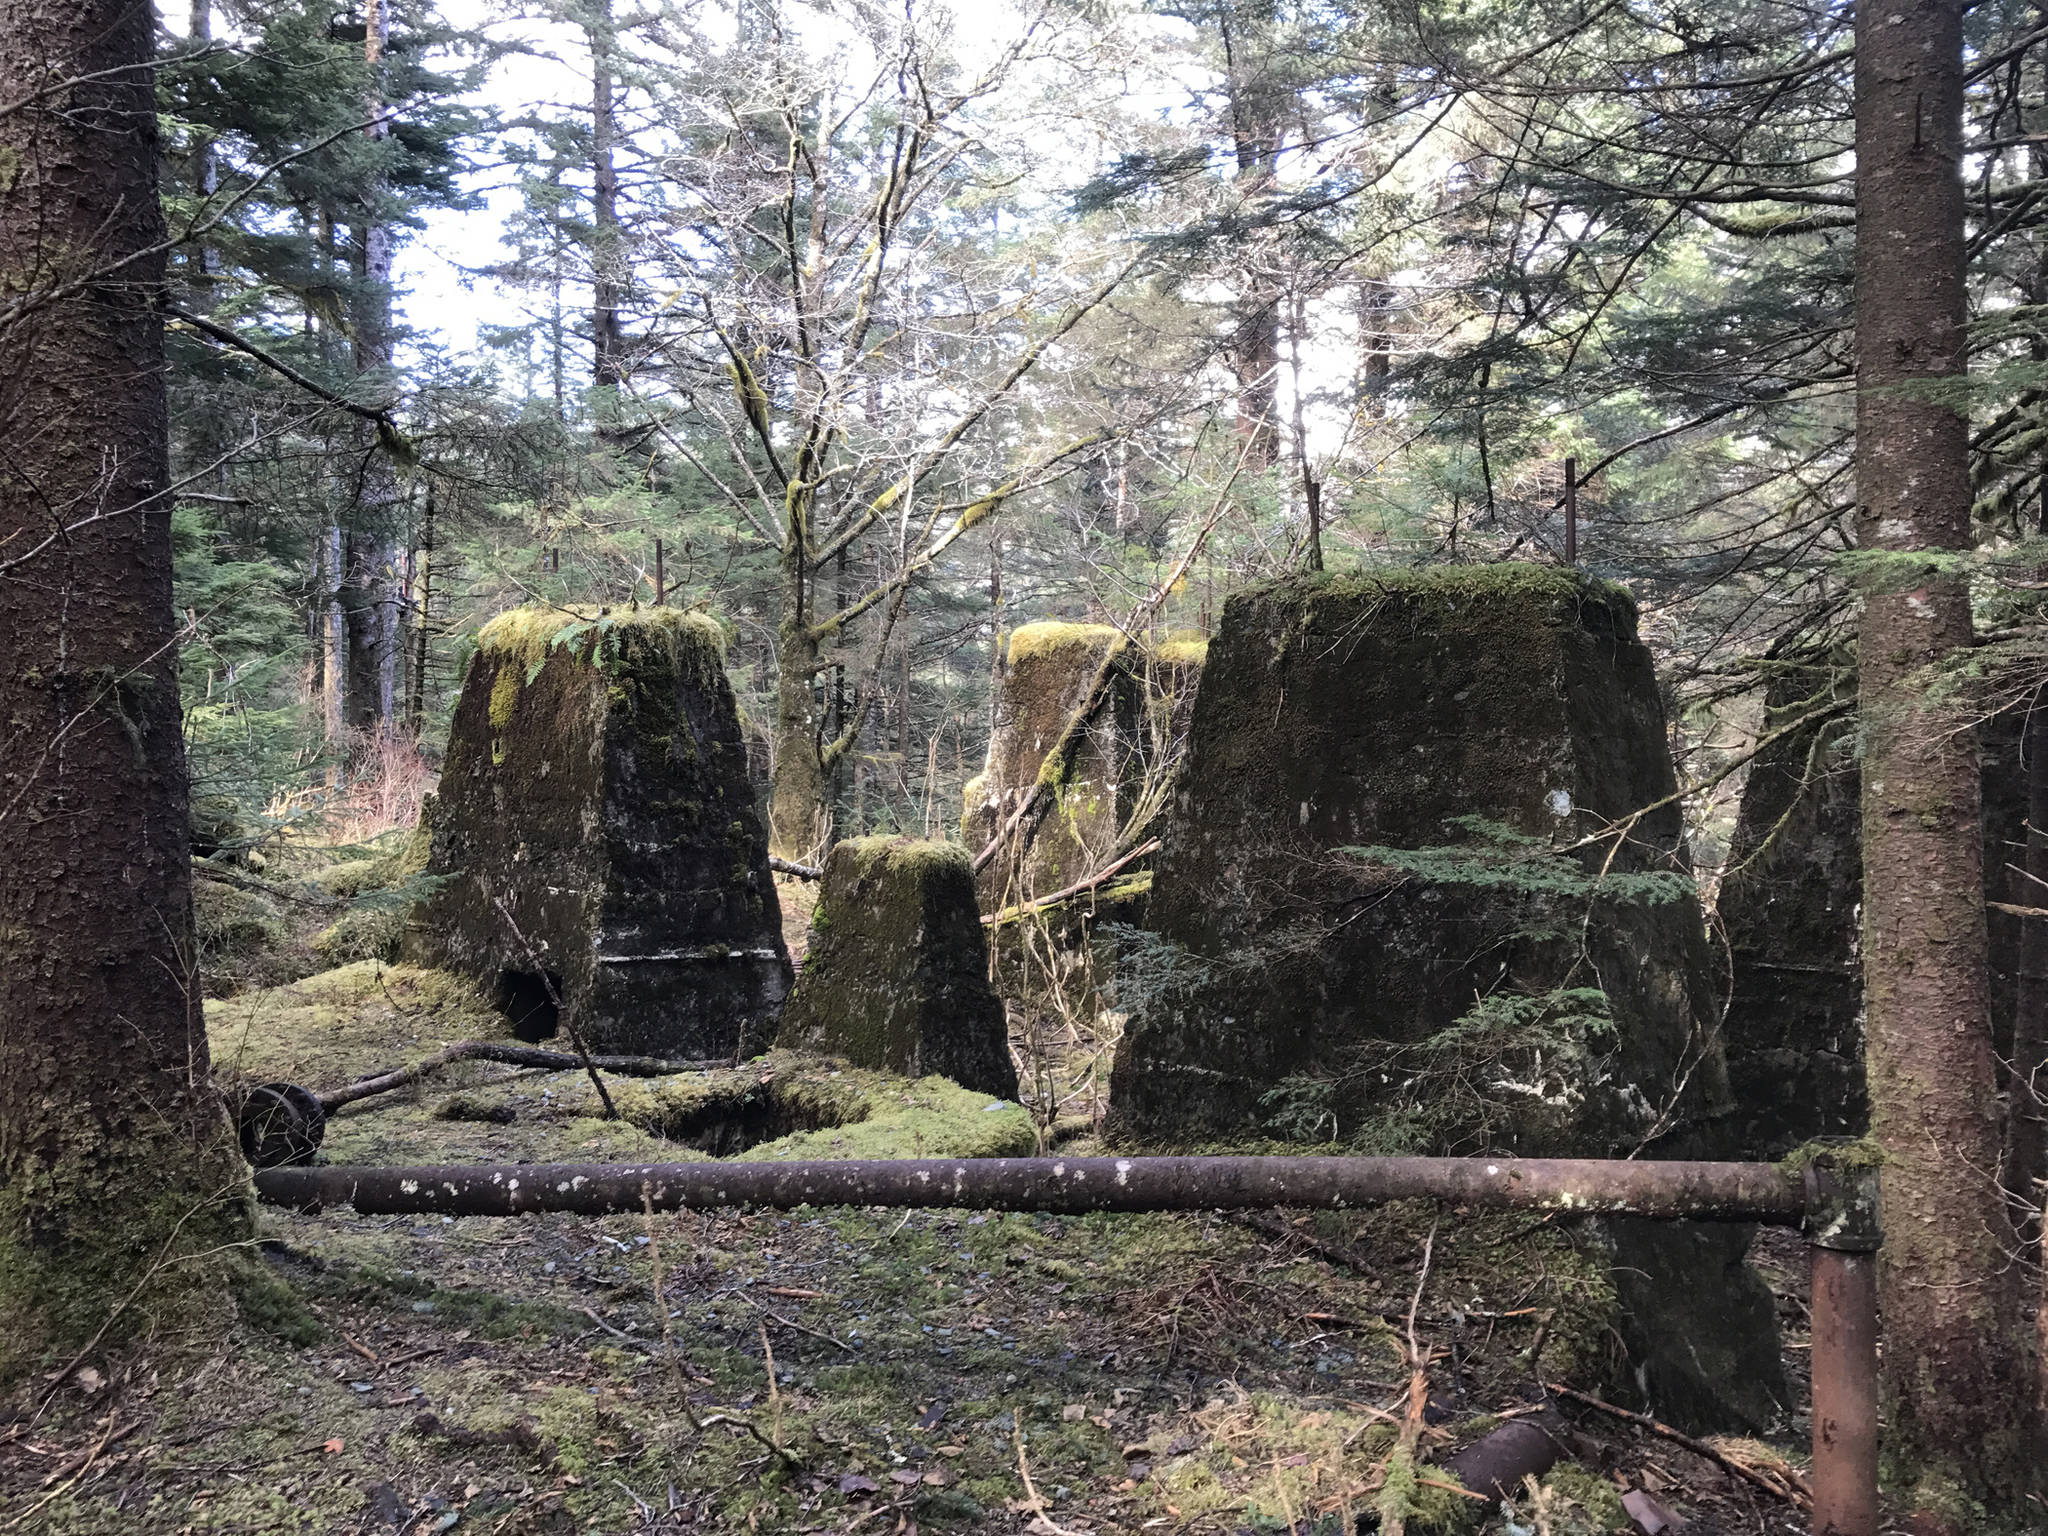 Most of the buildings of the town of Treadwell have crumbled, now overgrown as the temperate rainforest has reclaimed the land. (Alex McCarthy | Juneau Empire)